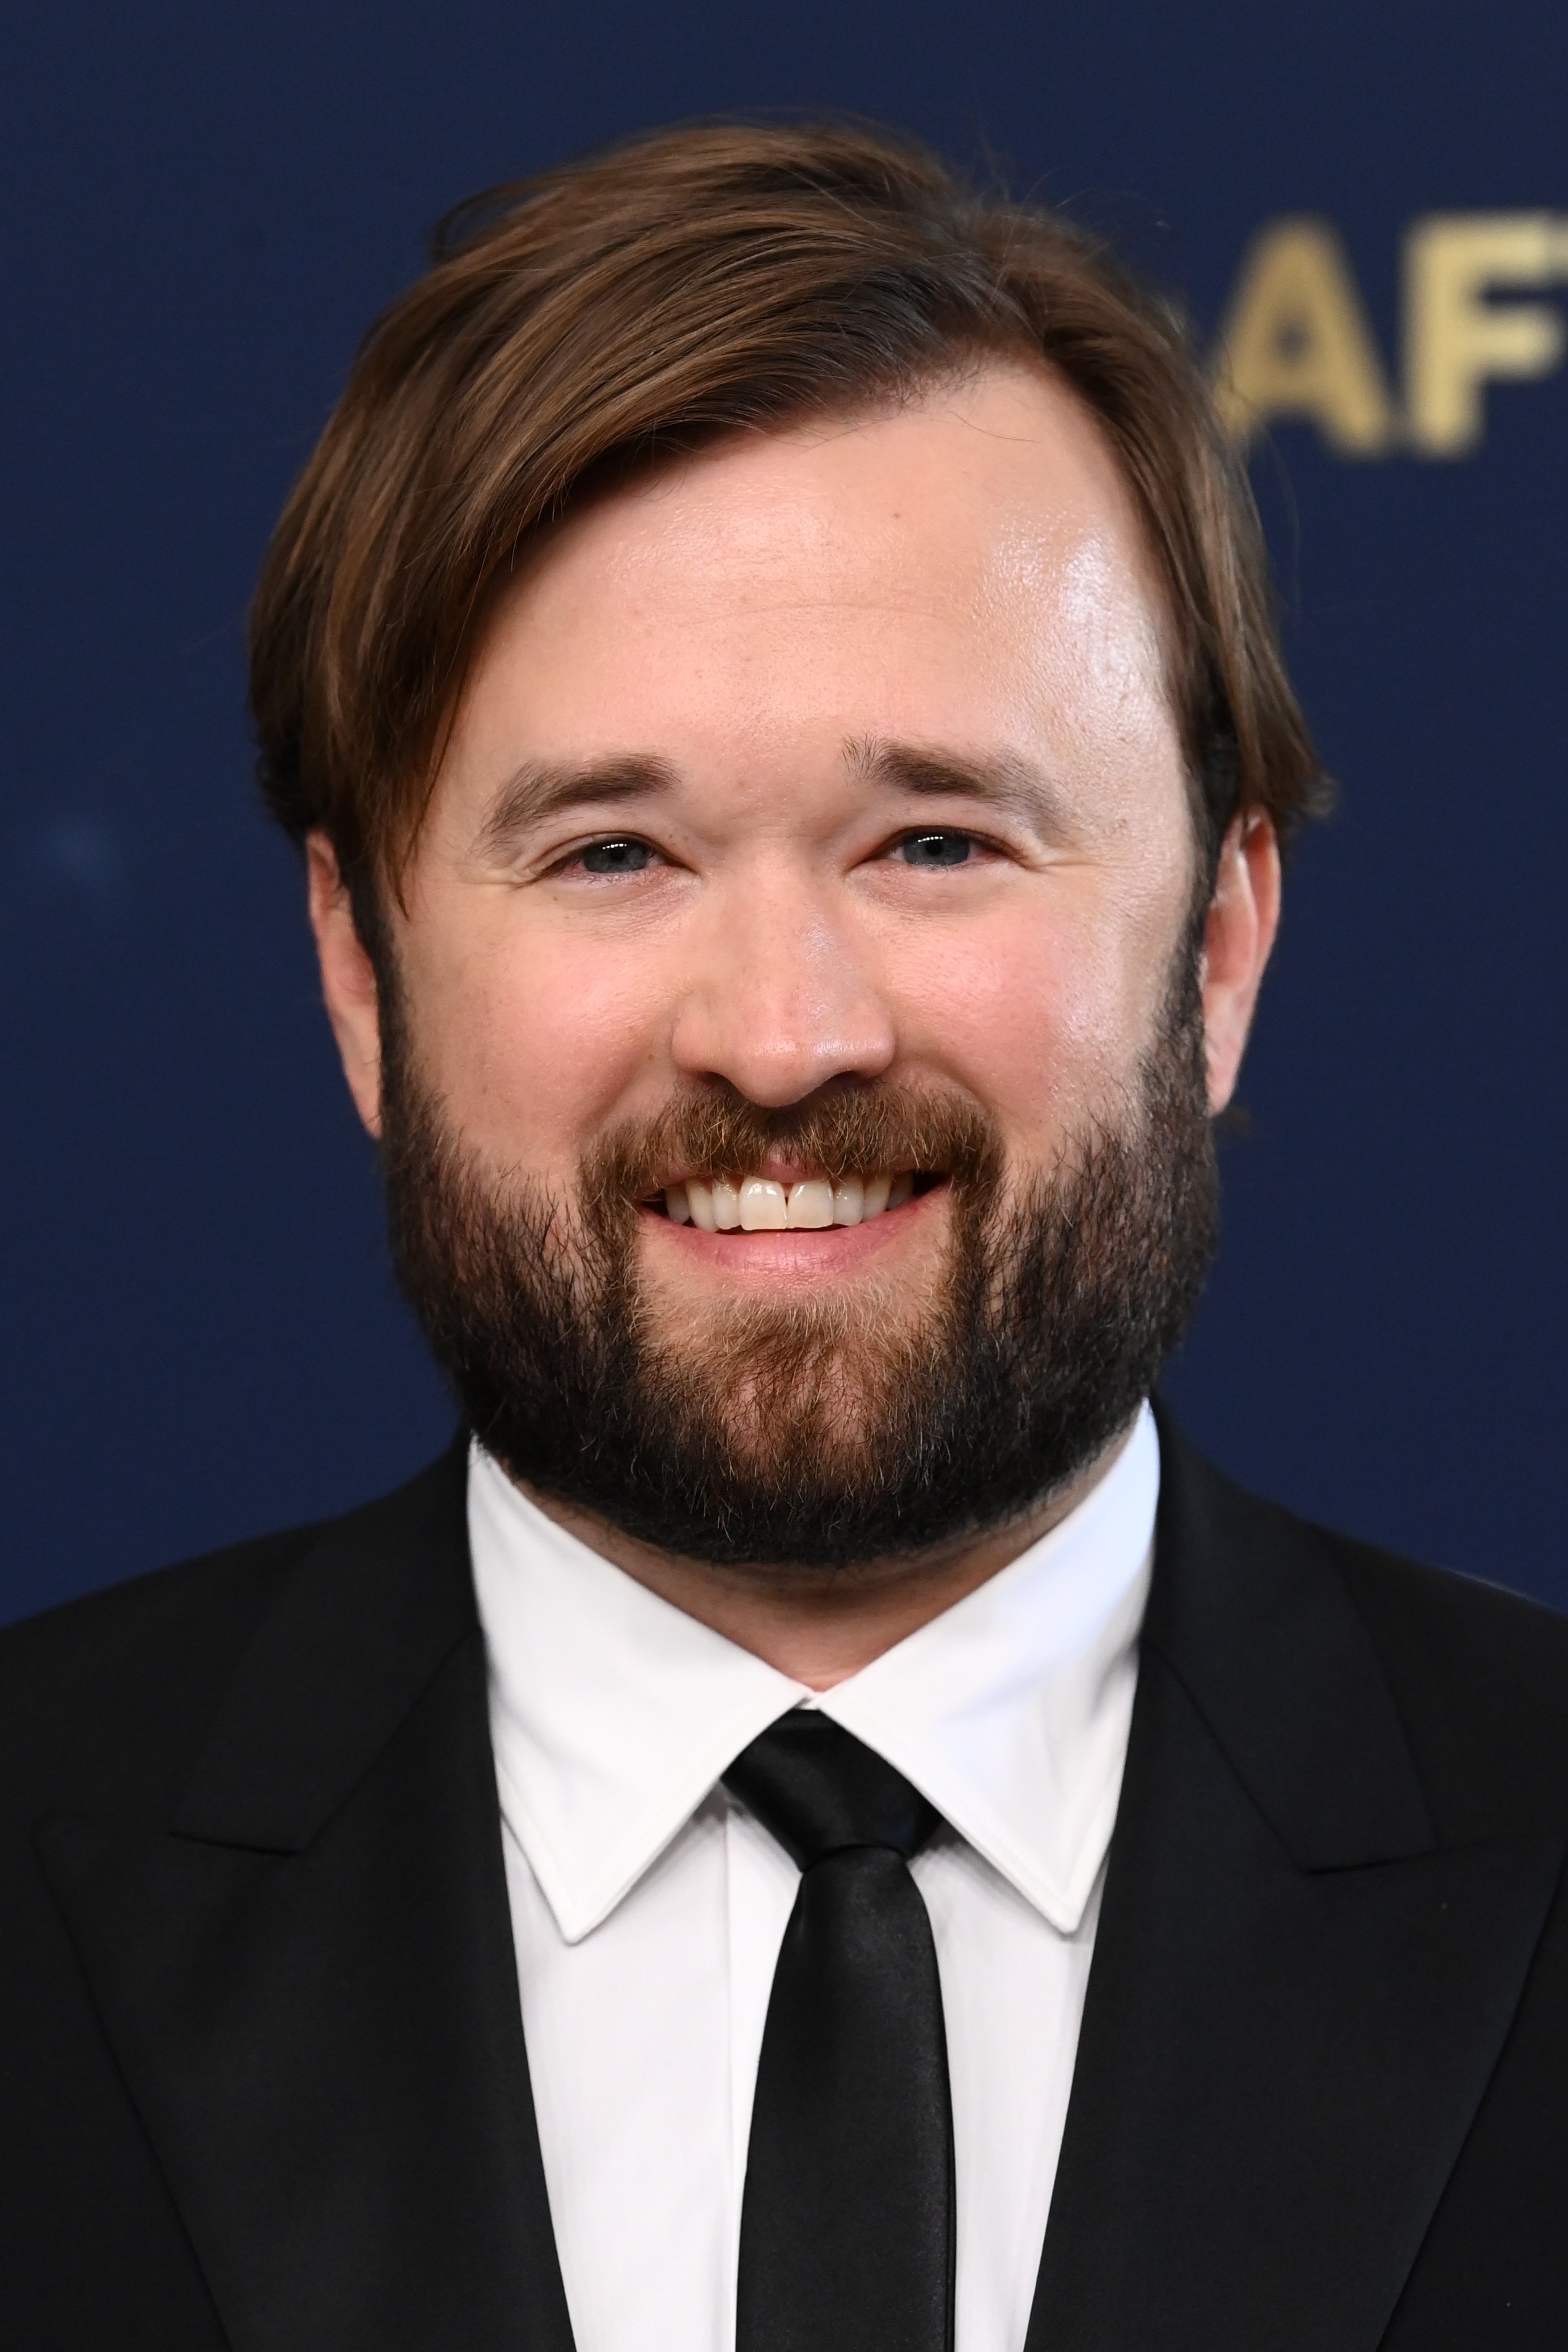 <p>In 2006, Haley Joel Osment pleaded no contest to misdemeanor DUI and drug-possession charges after he hit a brick mailbox and flipped his car while driving near Los Angeles. In 2010, the former child star graduated from New York University's Tisch School of the Arts. Though he keeps a low profile, Haley works regularly: He appeared in 2015's "Entourage" movie, 2016's "Me Him Her" and "Yoga Hosers," HBO's tech comedy "Silicon Valley" in 2017, "The X-Files" in 2018 and "The Kominsky Method" from 2019 to 2021. He's a successful voice actor as well with credits on "American Dad" and 2021's "Jurassic World: Camp Cretaceous" and "Dogs in Space." </p>